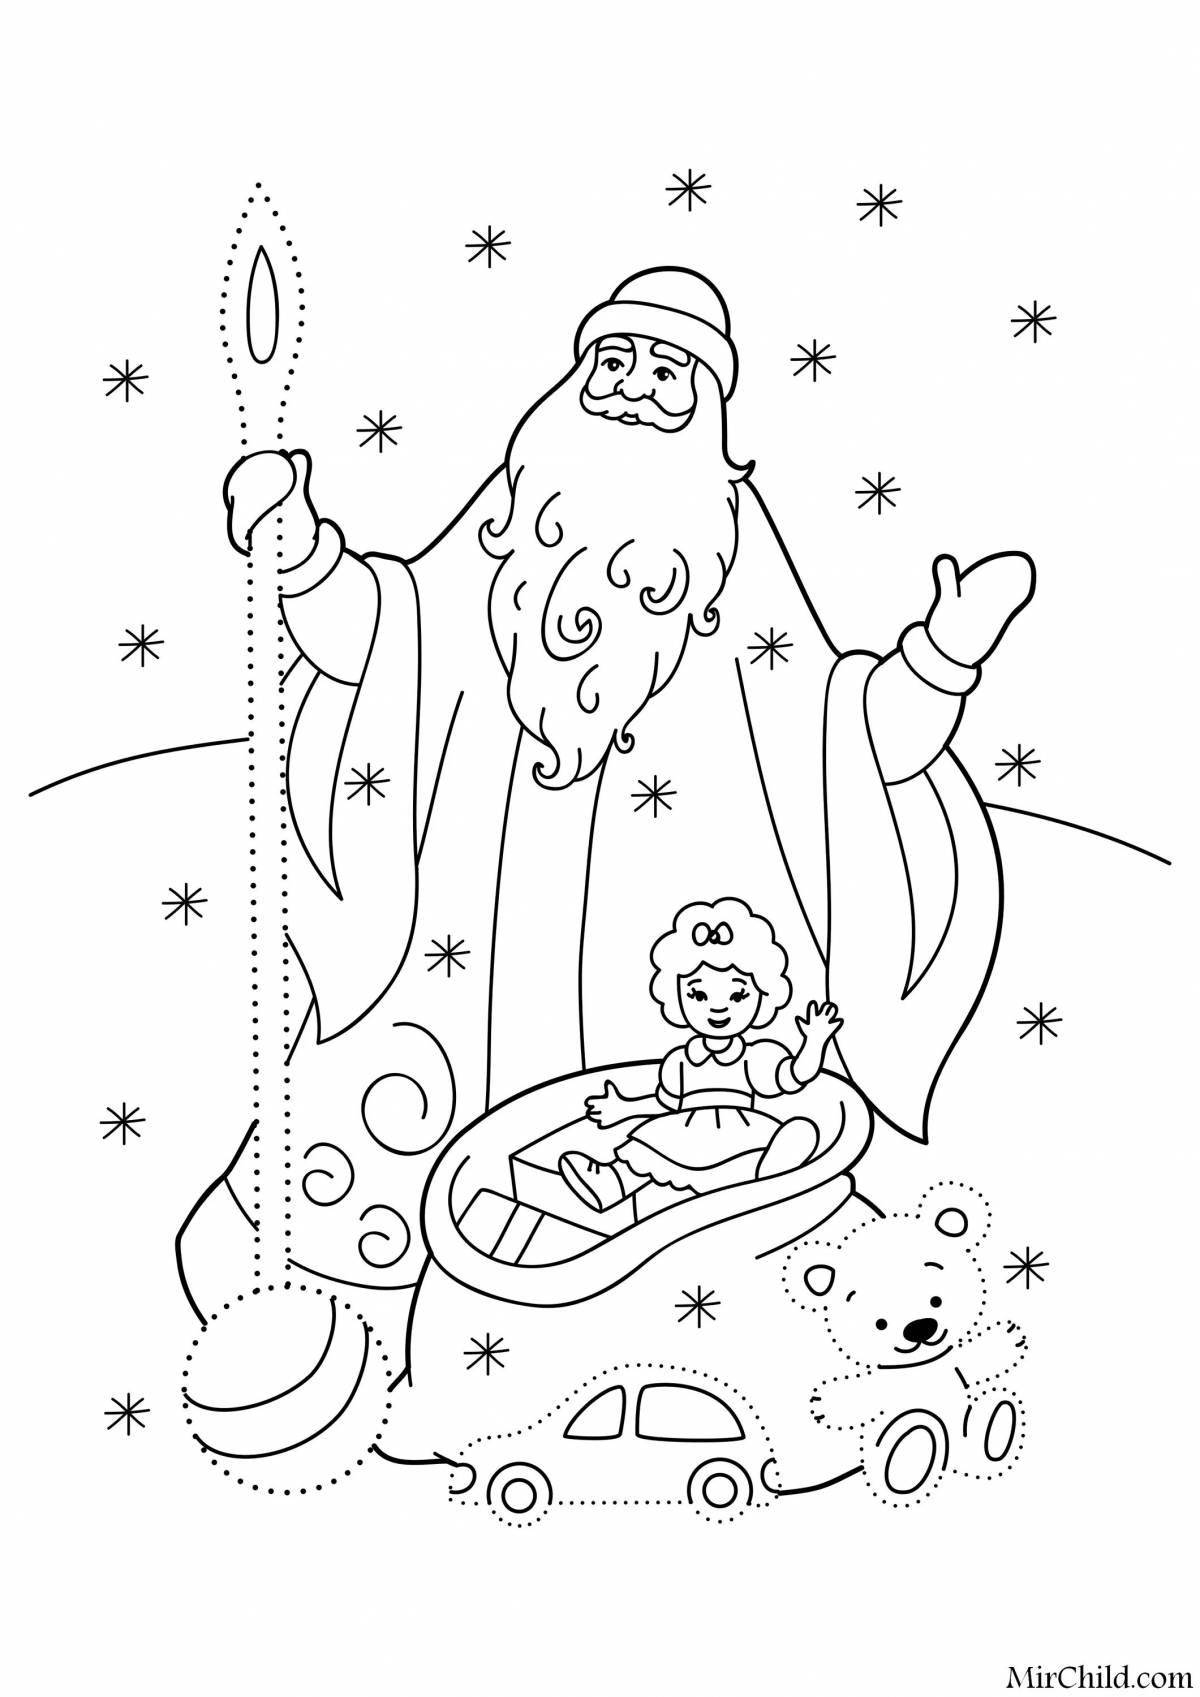 Playful Christmas coloring book for boys